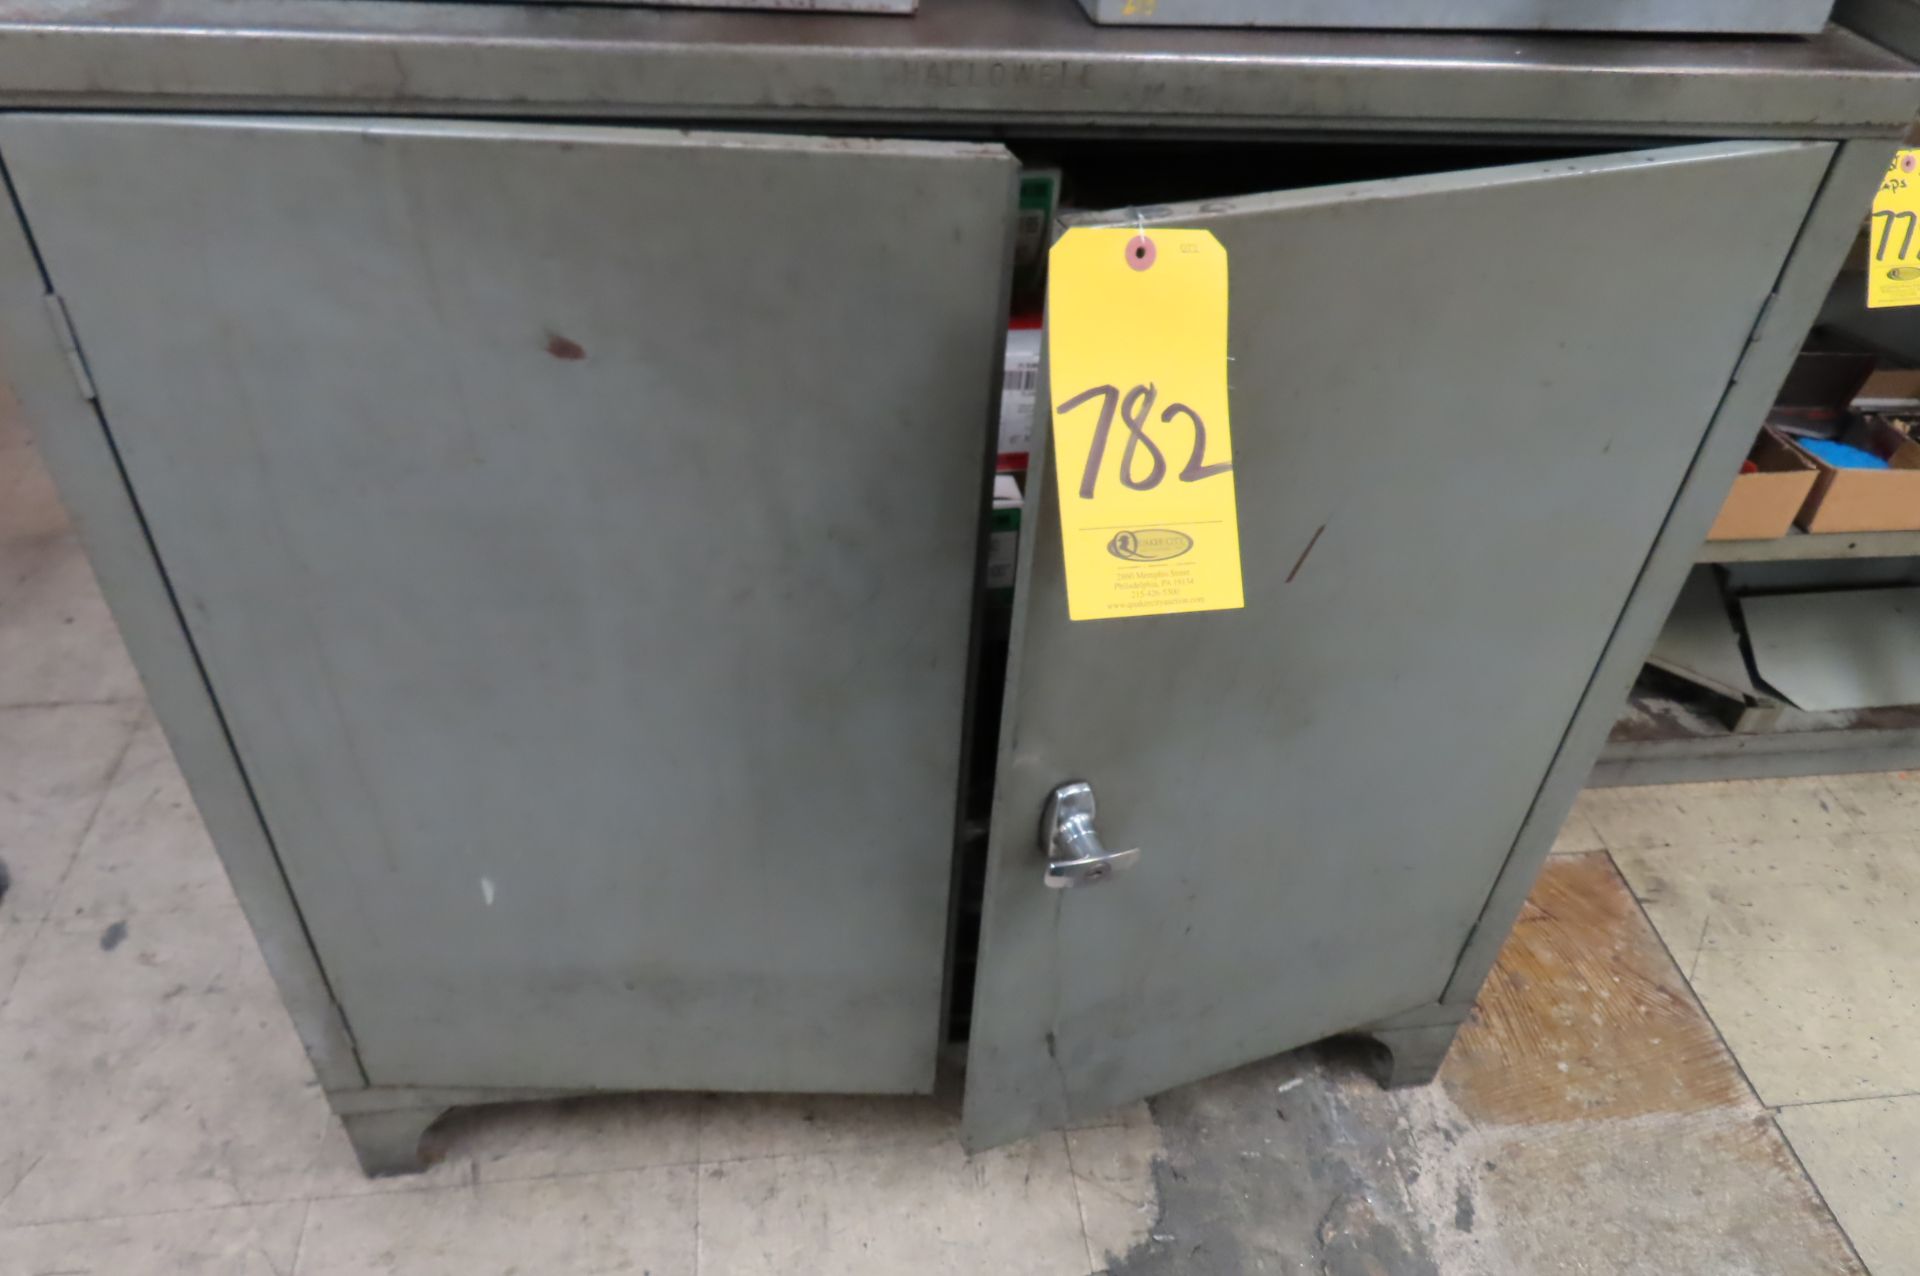 36 IN. SHOP CABINET